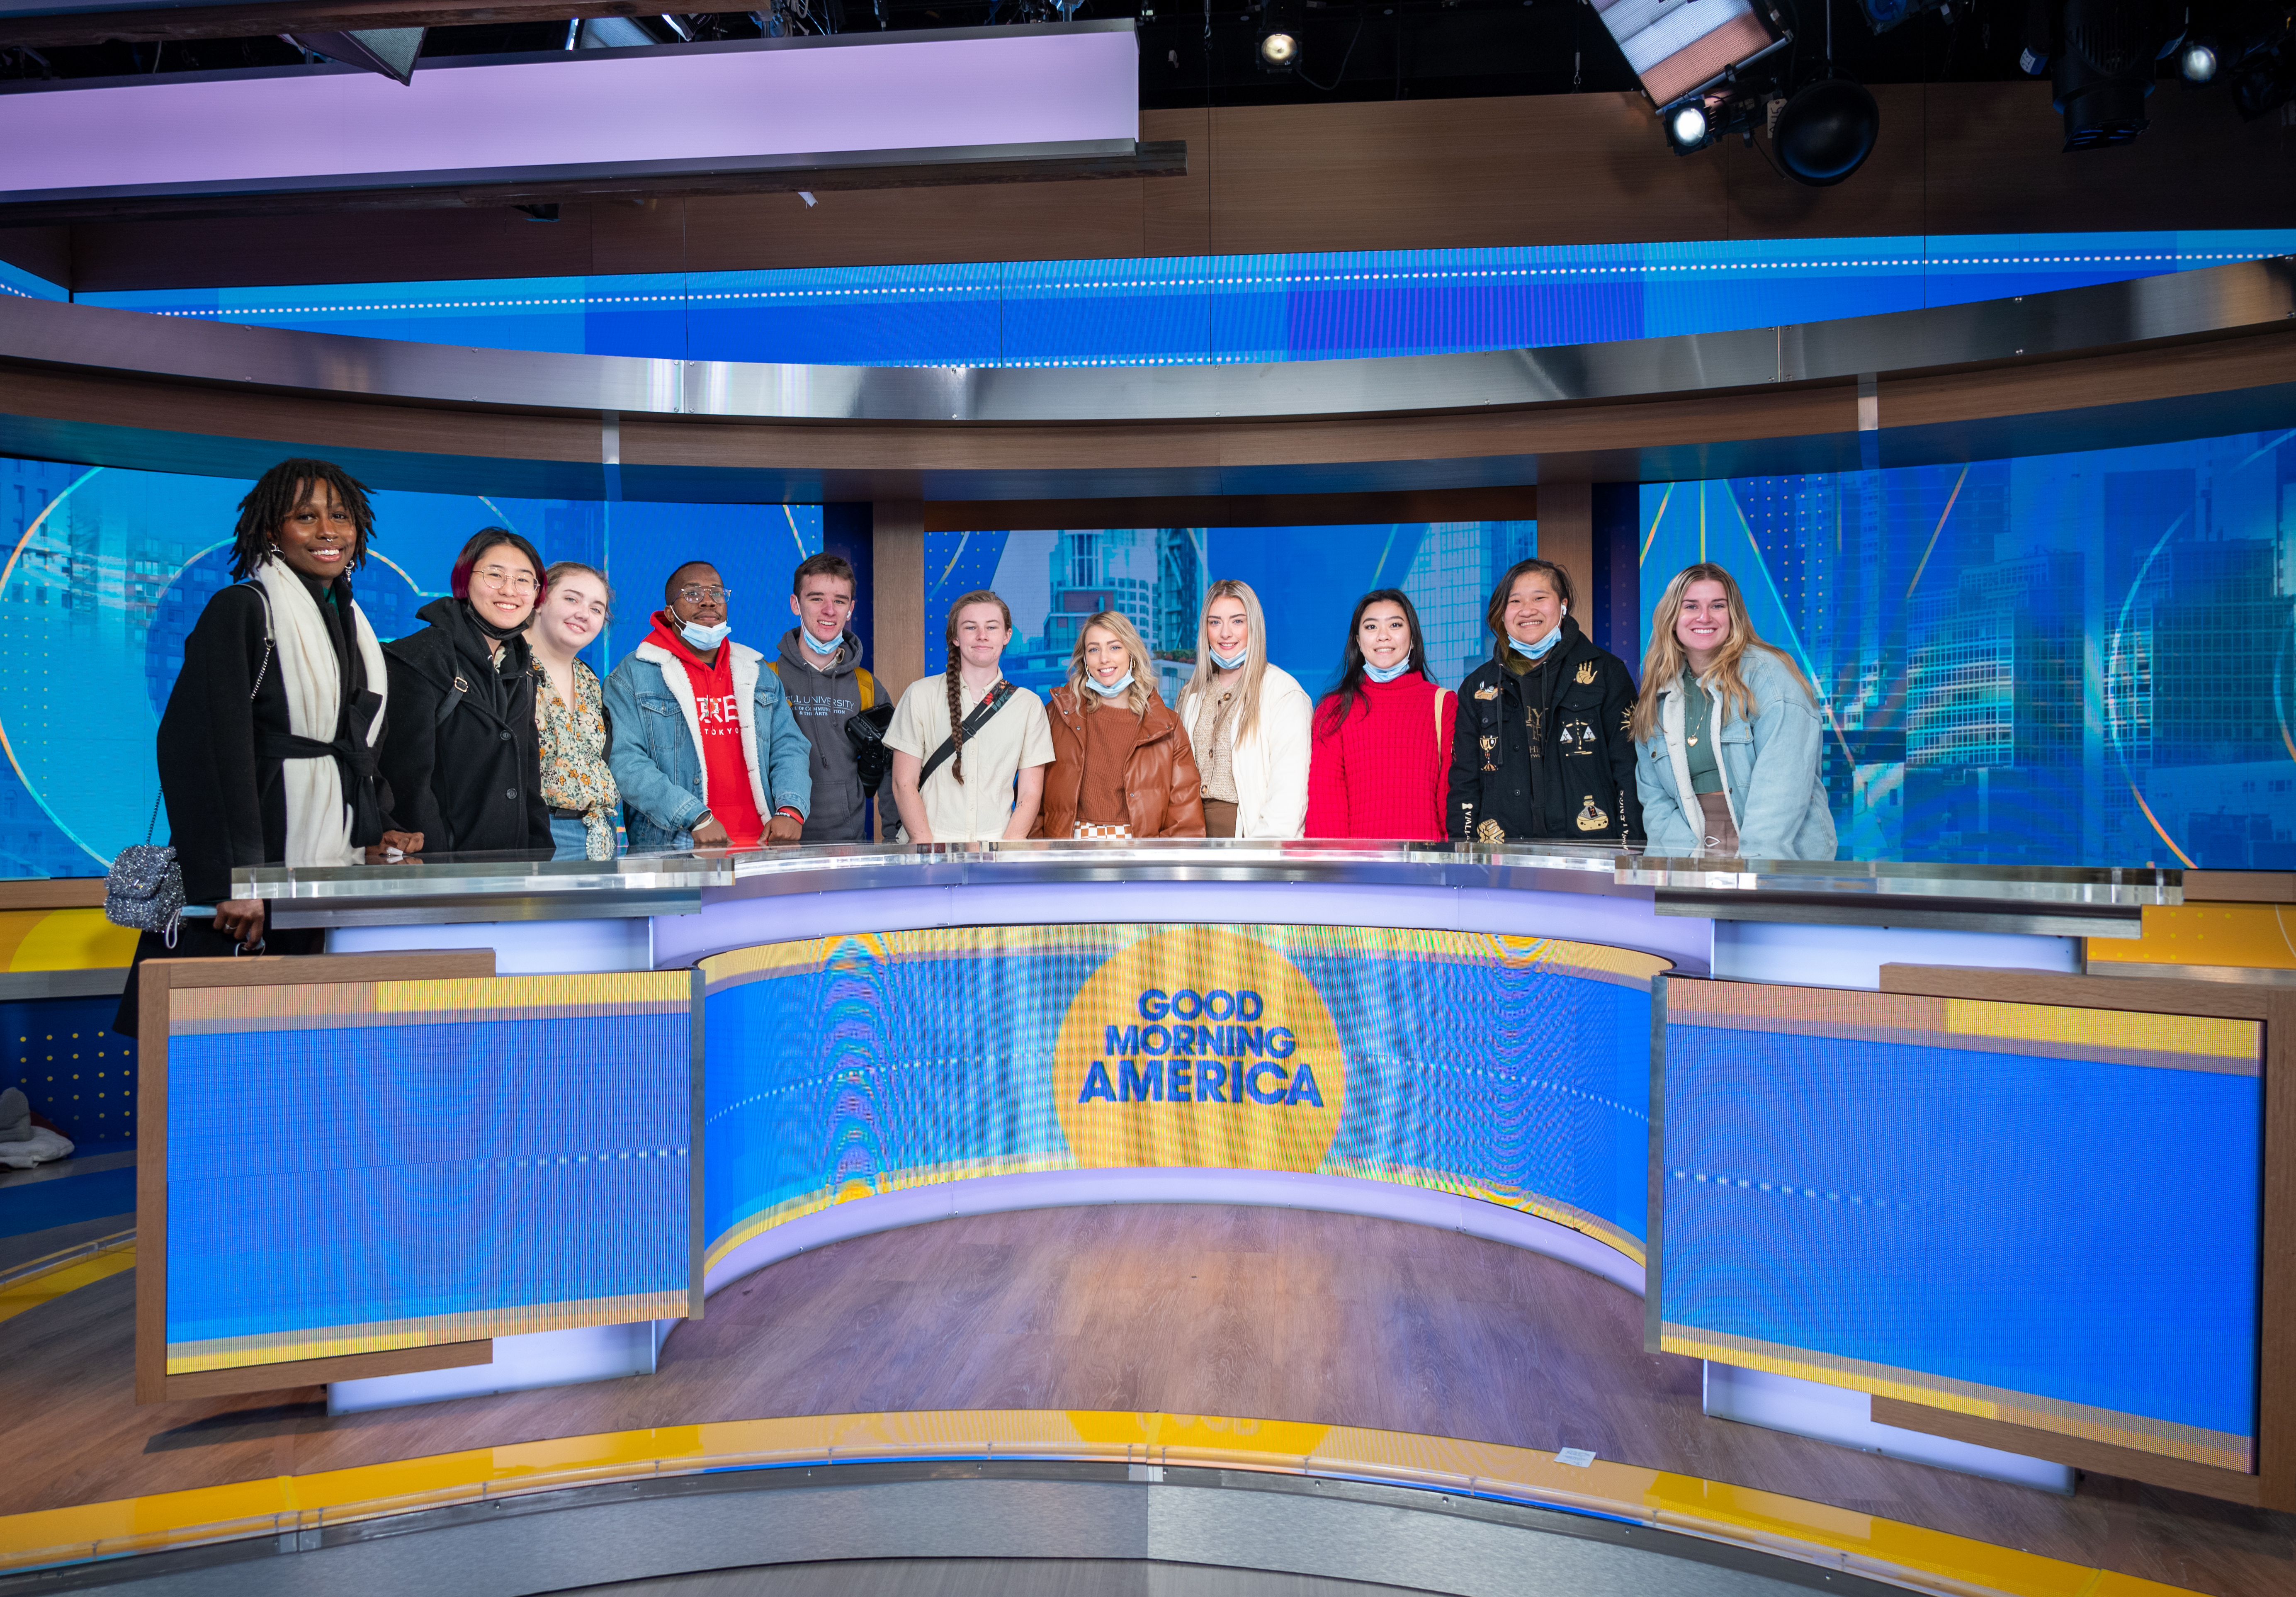 Lasell University students behind the "Good Morning America" desk